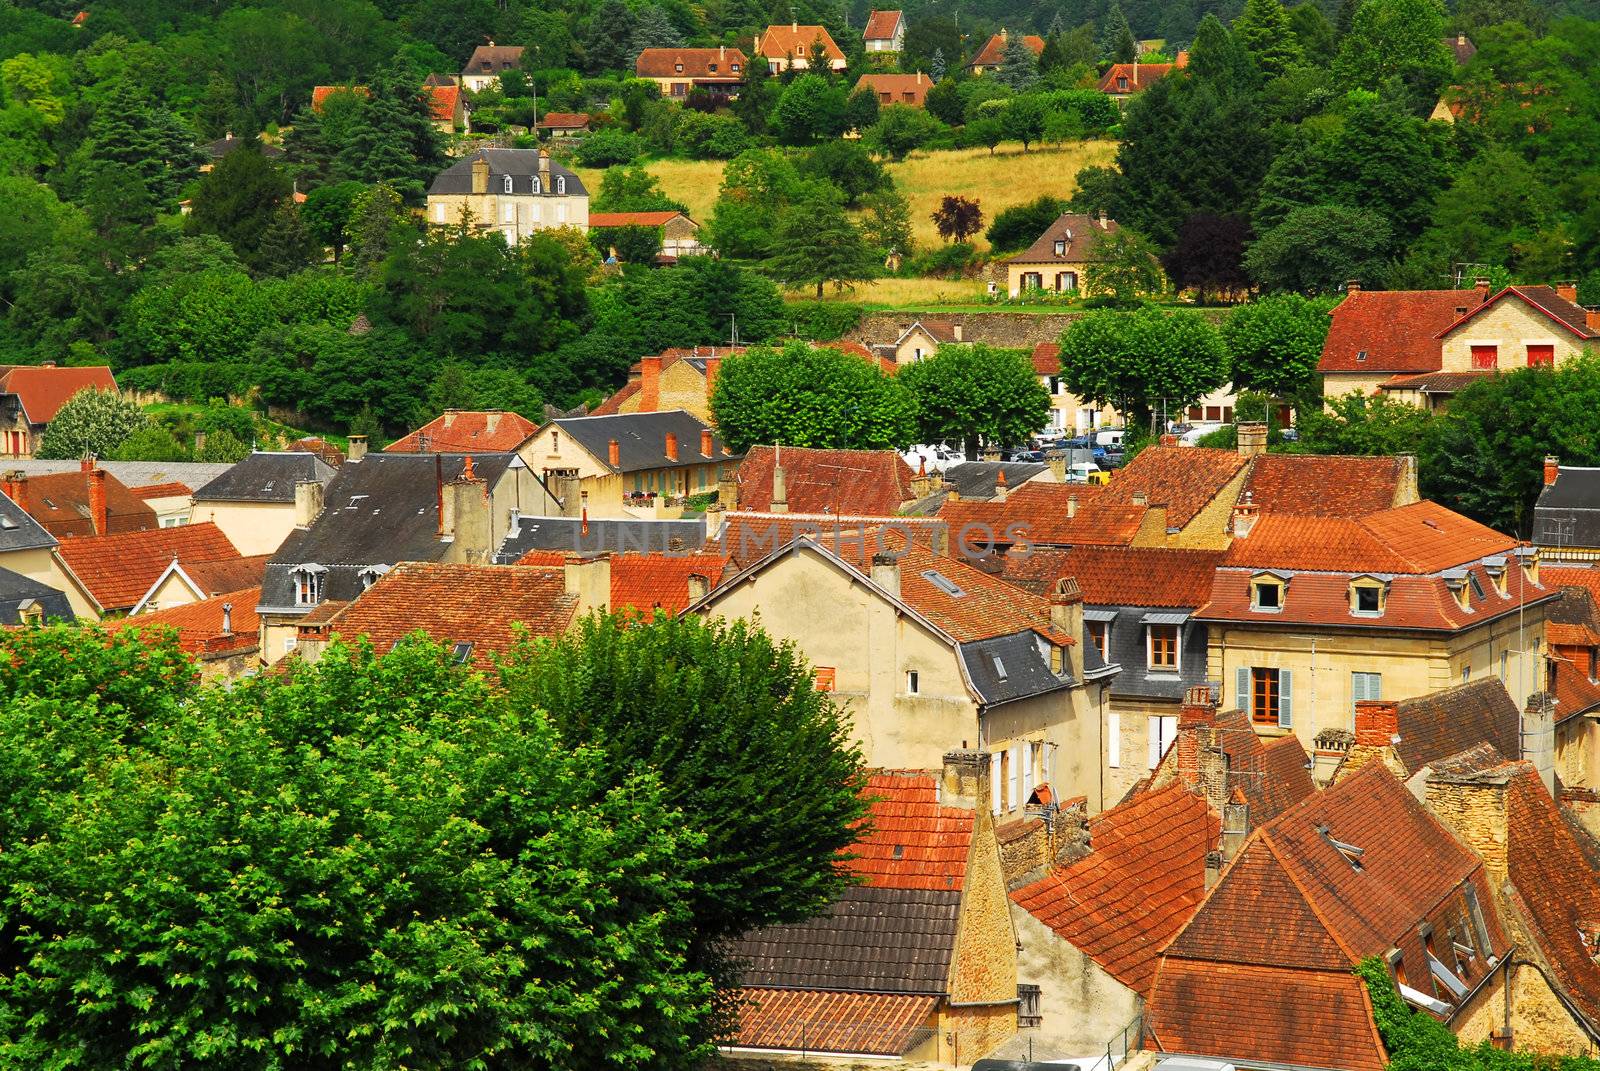 Rooftops in Sarlat, France by elenathewise